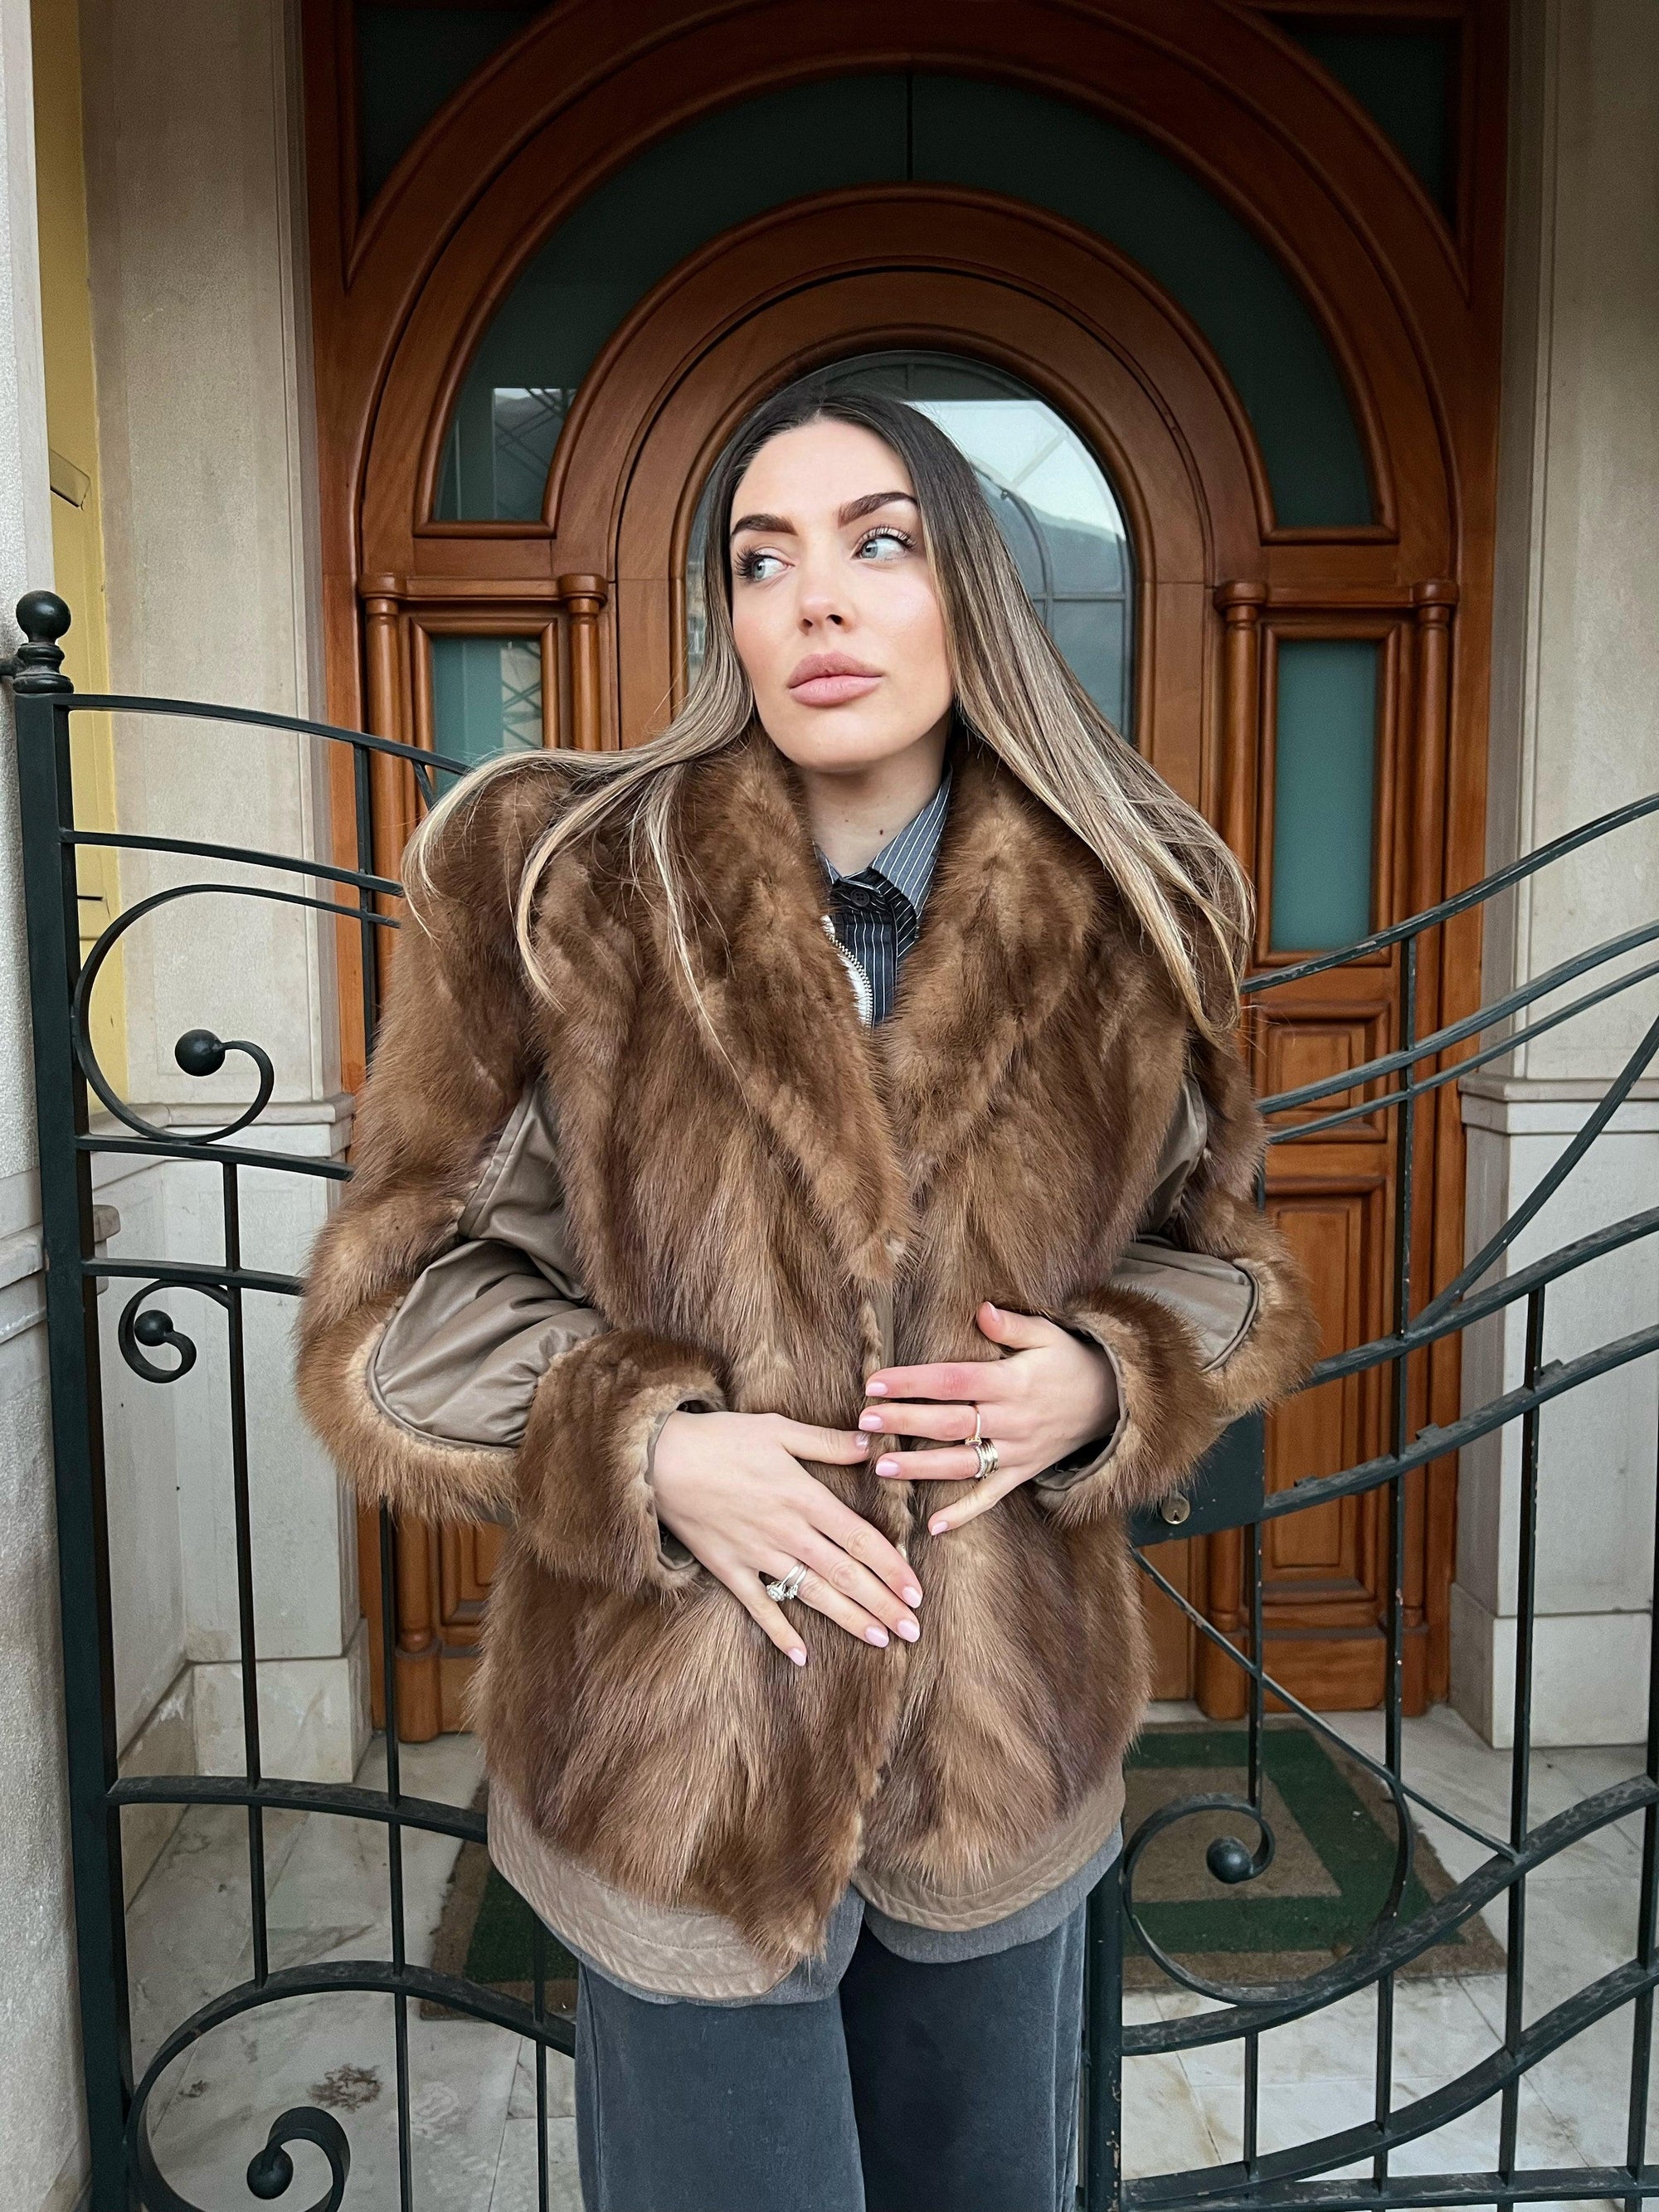 Pelliccia in visone con inserti in pelle - limited edition - best quality - N28- pelliccia vintage non ecologica - real fur - special price - limited Edition - Jiumir